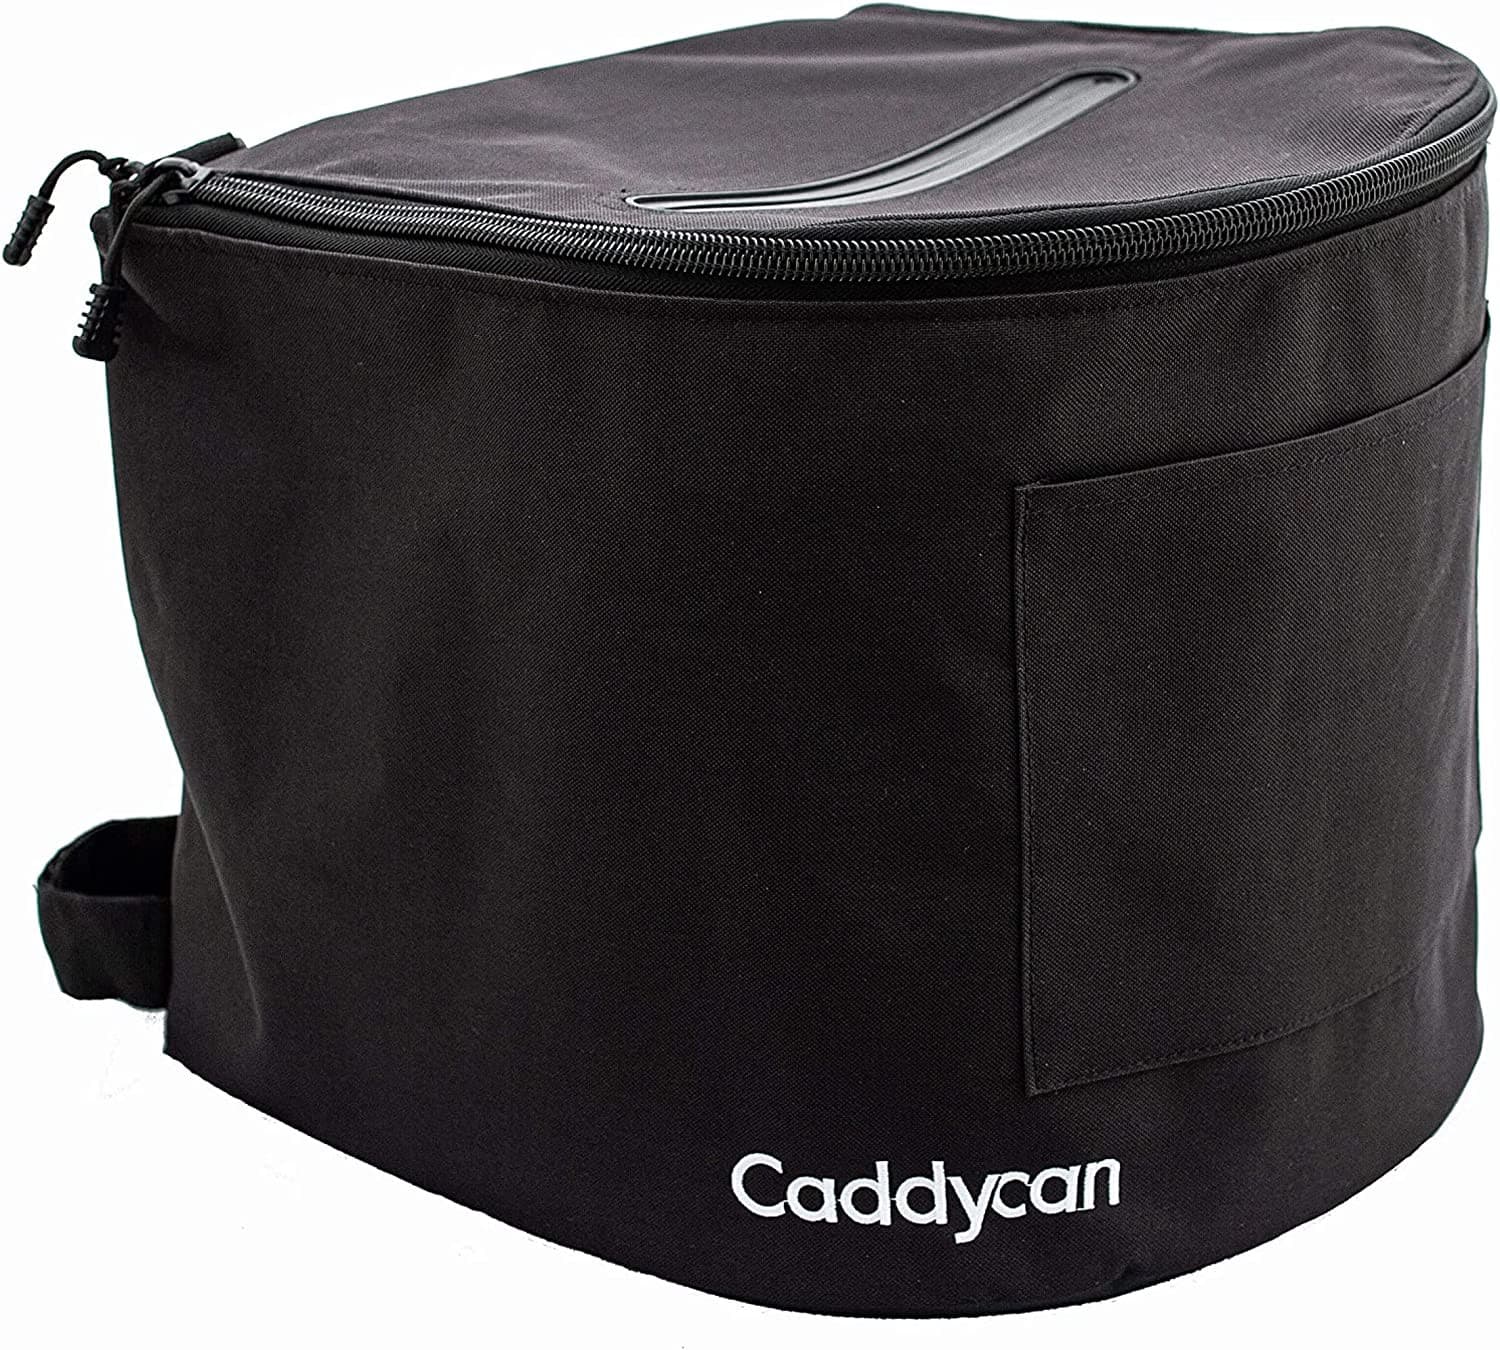 Camping and Outdoor Gear - Caddycan®